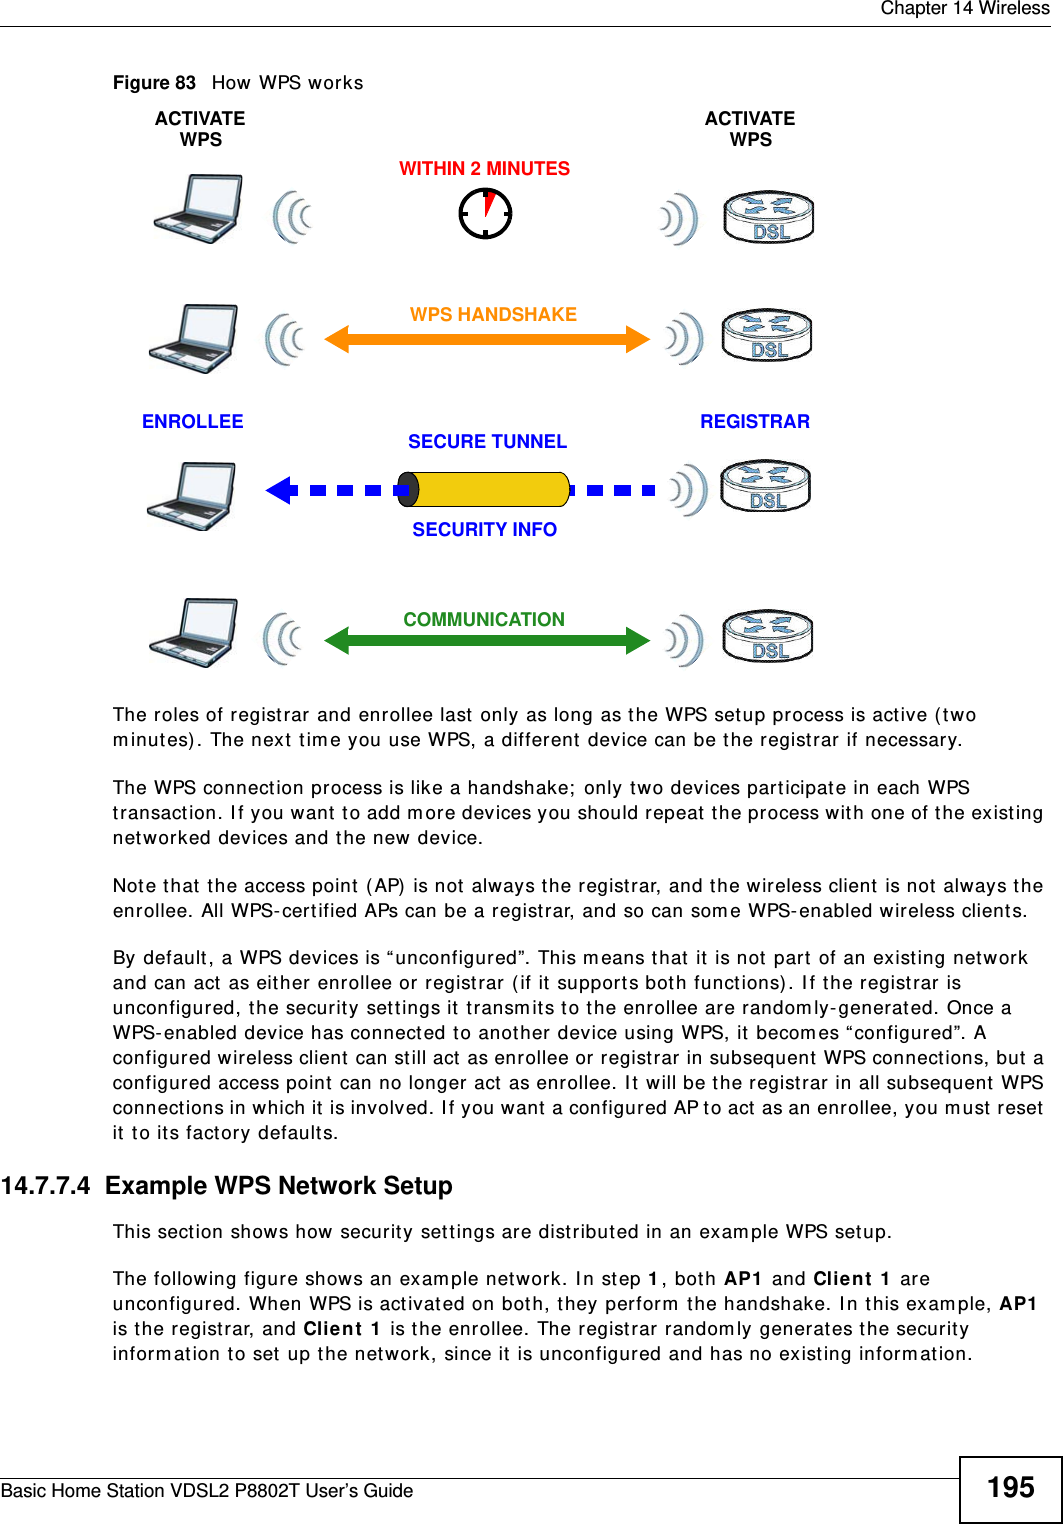  Chapter 14 WirelessBasic Home Station VDSL2 P8802T User’s Guide 195Figure 83   How WPS w orksThe roles of regist rar and enrollee last  only as long as t he WPS setup process is act ive ( t wo m inutes) . The next t im e you use WPS, a different  device can be t he regist rar if necessary.The WPS connect ion process is like a handshake;  only t wo devices part icipate in each WPS transact ion. I f you want  to add m ore devices you should repeat  t he process with one of t he exist ing net worked devices and the new  device.Note that the access point ( AP)  is not always the registrar, and t he wireless client  is not  always t he enrollee. All WPS- certified APs can be a regist rar, and so can som e WPS- enabled wireless clients.By default , a WPS devices is “ unconfigured”. This m eans t hat  it is not part of an exist ing net work and can act  as either enrollee or regist rar (if it support s bot h funct ions) . I f t he regist rar is unconfigured, the security set t ings it transm its t o t he enrollee are random ly-generated. Once a WPS- enabled device has connect ed t o anot her device using WPS, it  becom es “ configured”. A configured wireless client  can st ill act as enrollee or regist rar in subsequent  WPS connections, but a configured access point can no longer act  as enrollee. I t  will be t he regist rar in all subsequent  WPS connect ions in which it  is involved. If you want  a configured AP t o act  as an enrollee, you m ust  reset it  t o its fact ory defaults.14.7.7.4  Example WPS Network SetupThis sect ion shows how  security sett ings are dist ribut ed in an exam ple WPS setup.The following figure shows an exam ple network. I n st ep 1, both AP1  and Client  1  are unconfigured. When WPS is act ivat ed on both, they perform  t he handshake. In this exam ple, AP1  is t he regist rar, and Clie nt 1  is t he enrollee. The regist rar random ly generates the security inform ation t o set up the network, since it is unconfigured and has no exist ing inform ation.SECURE TUNNELSECURITY INFOWITHIN 2 MINUTESCOMMUNICATIONACTIVATEWPSACTIVATEWPSWPS HANDSHAKEREGISTRARENROLLEE